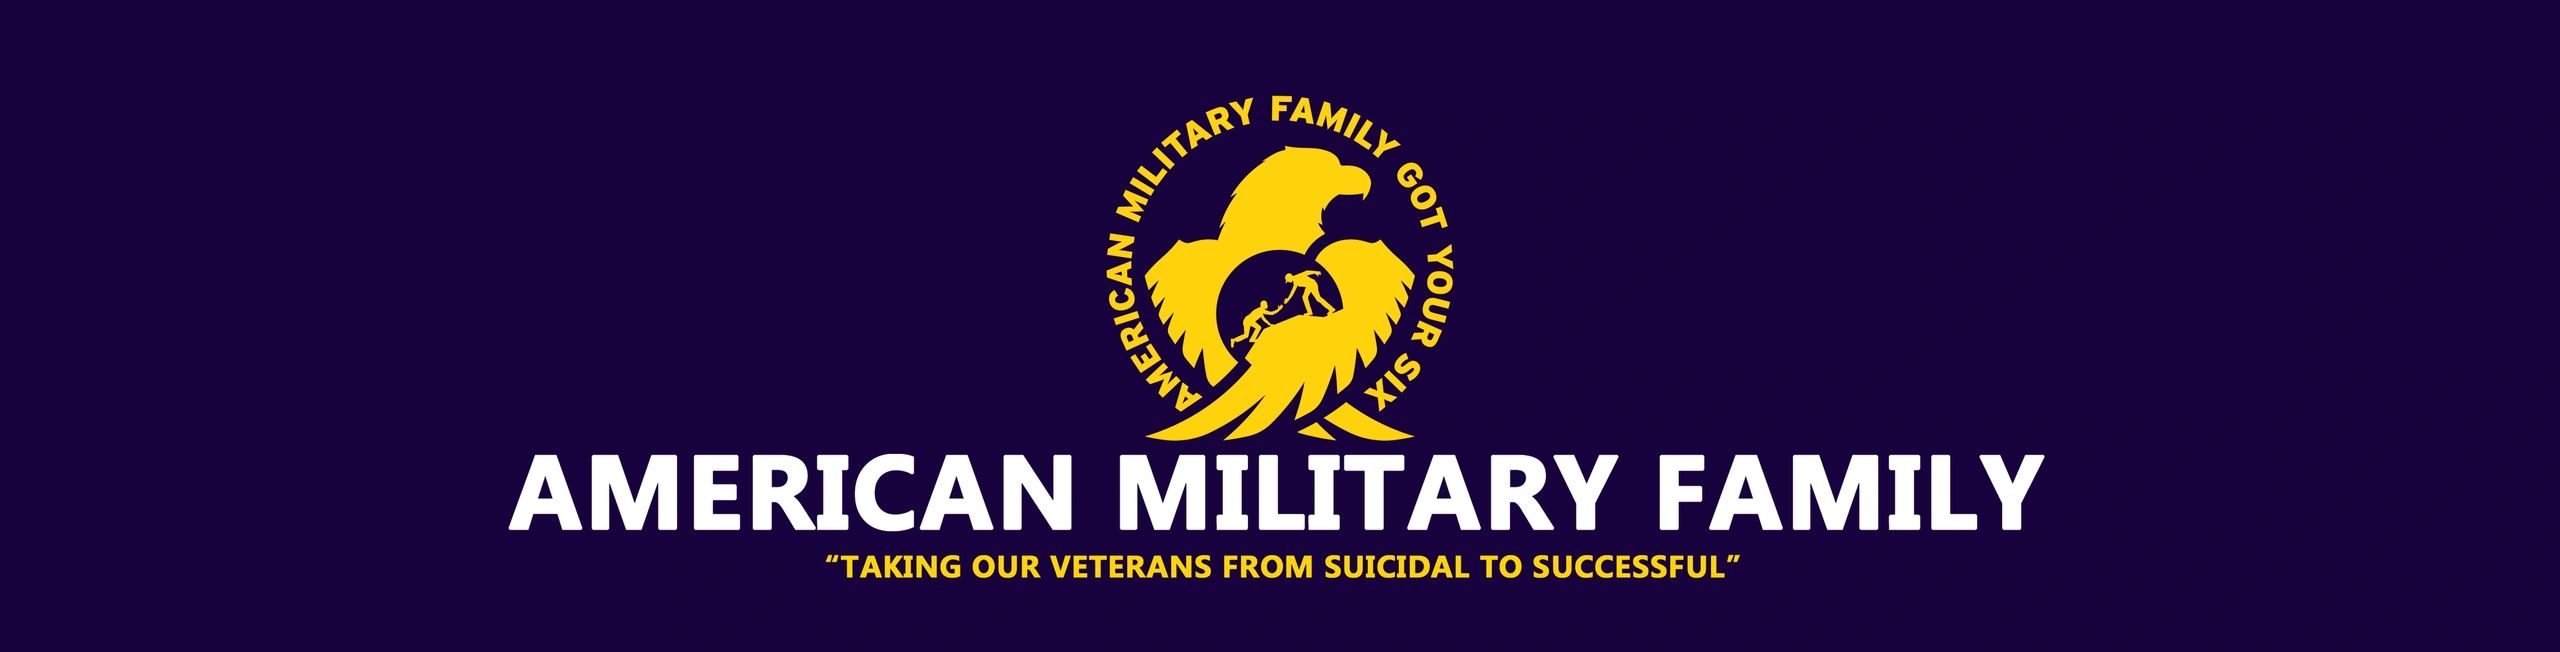 americanmilitaryfamily.org